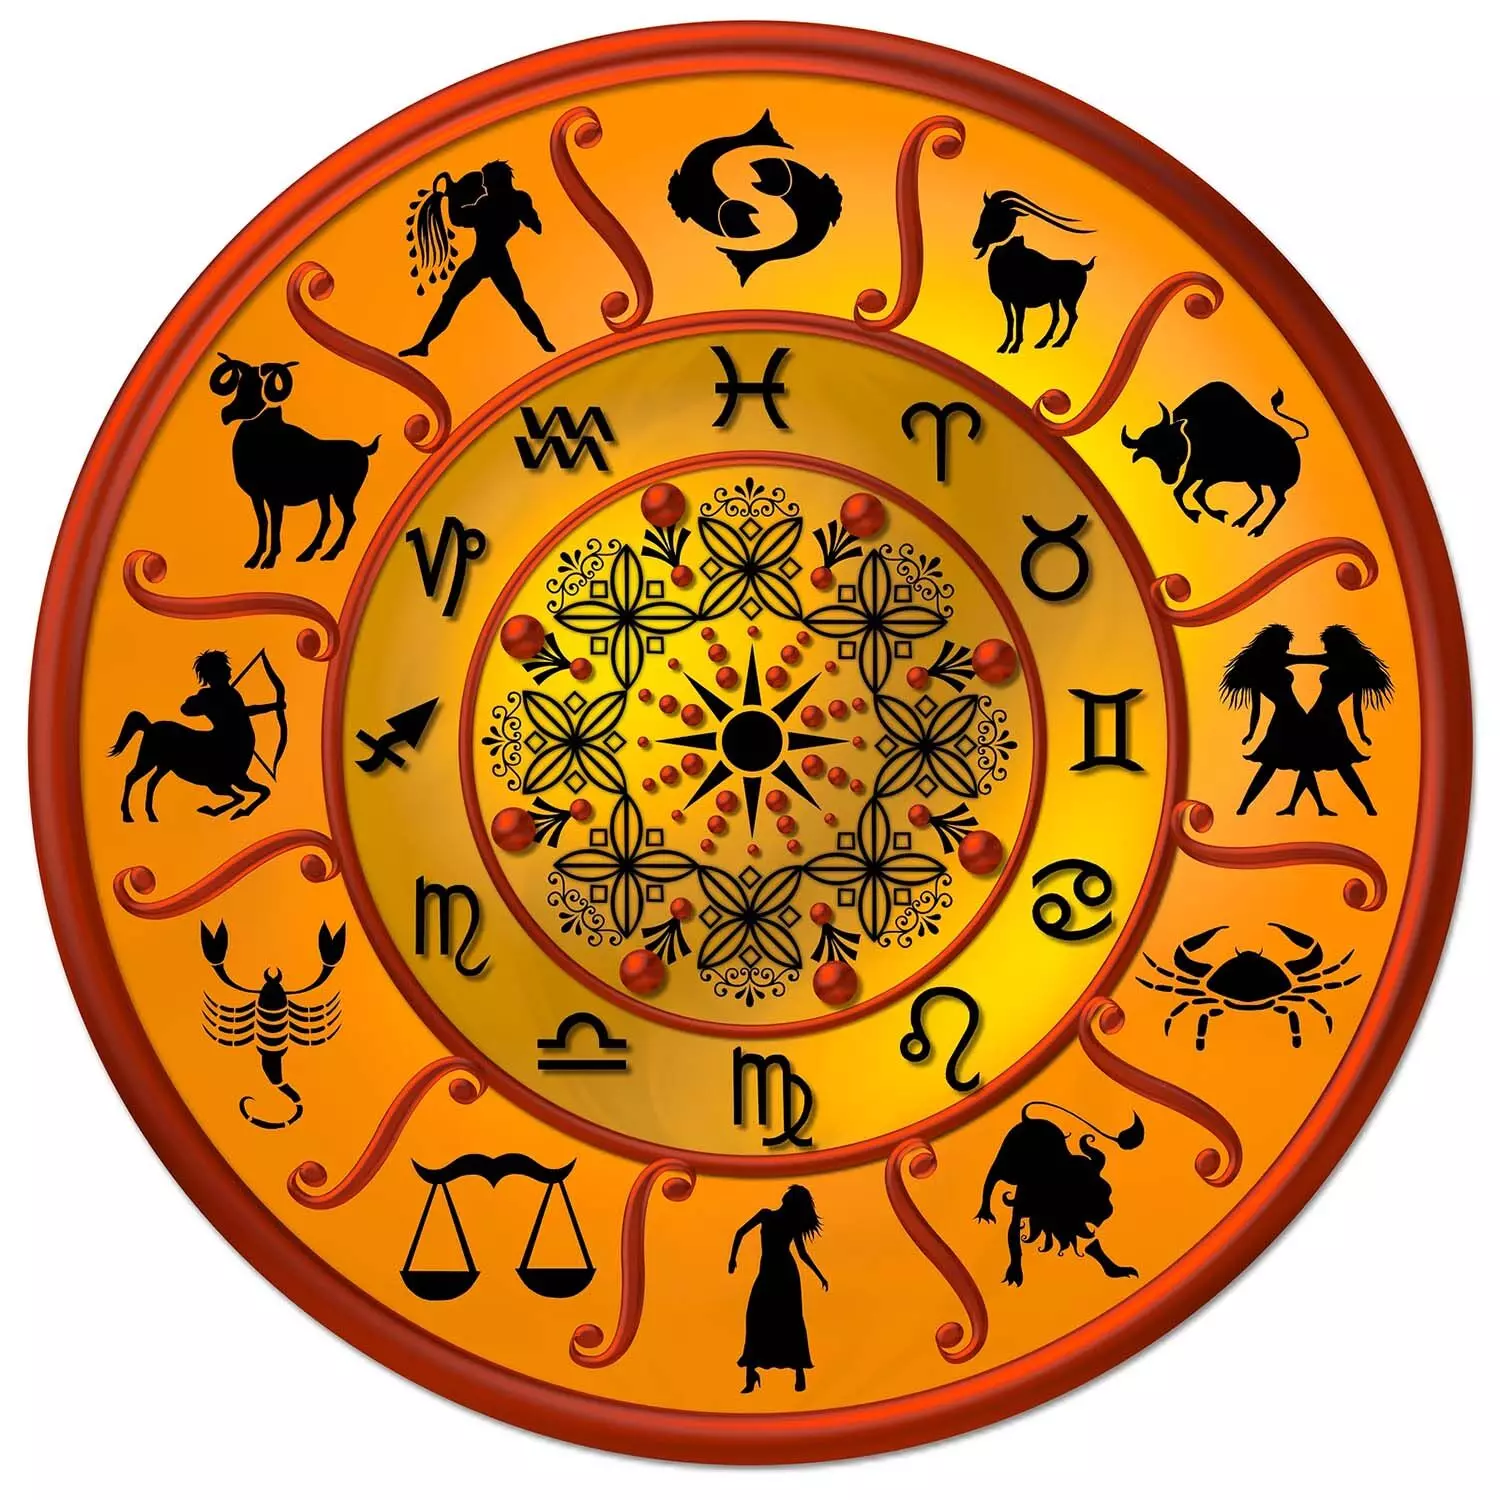 24 June – Know your todays horoscope